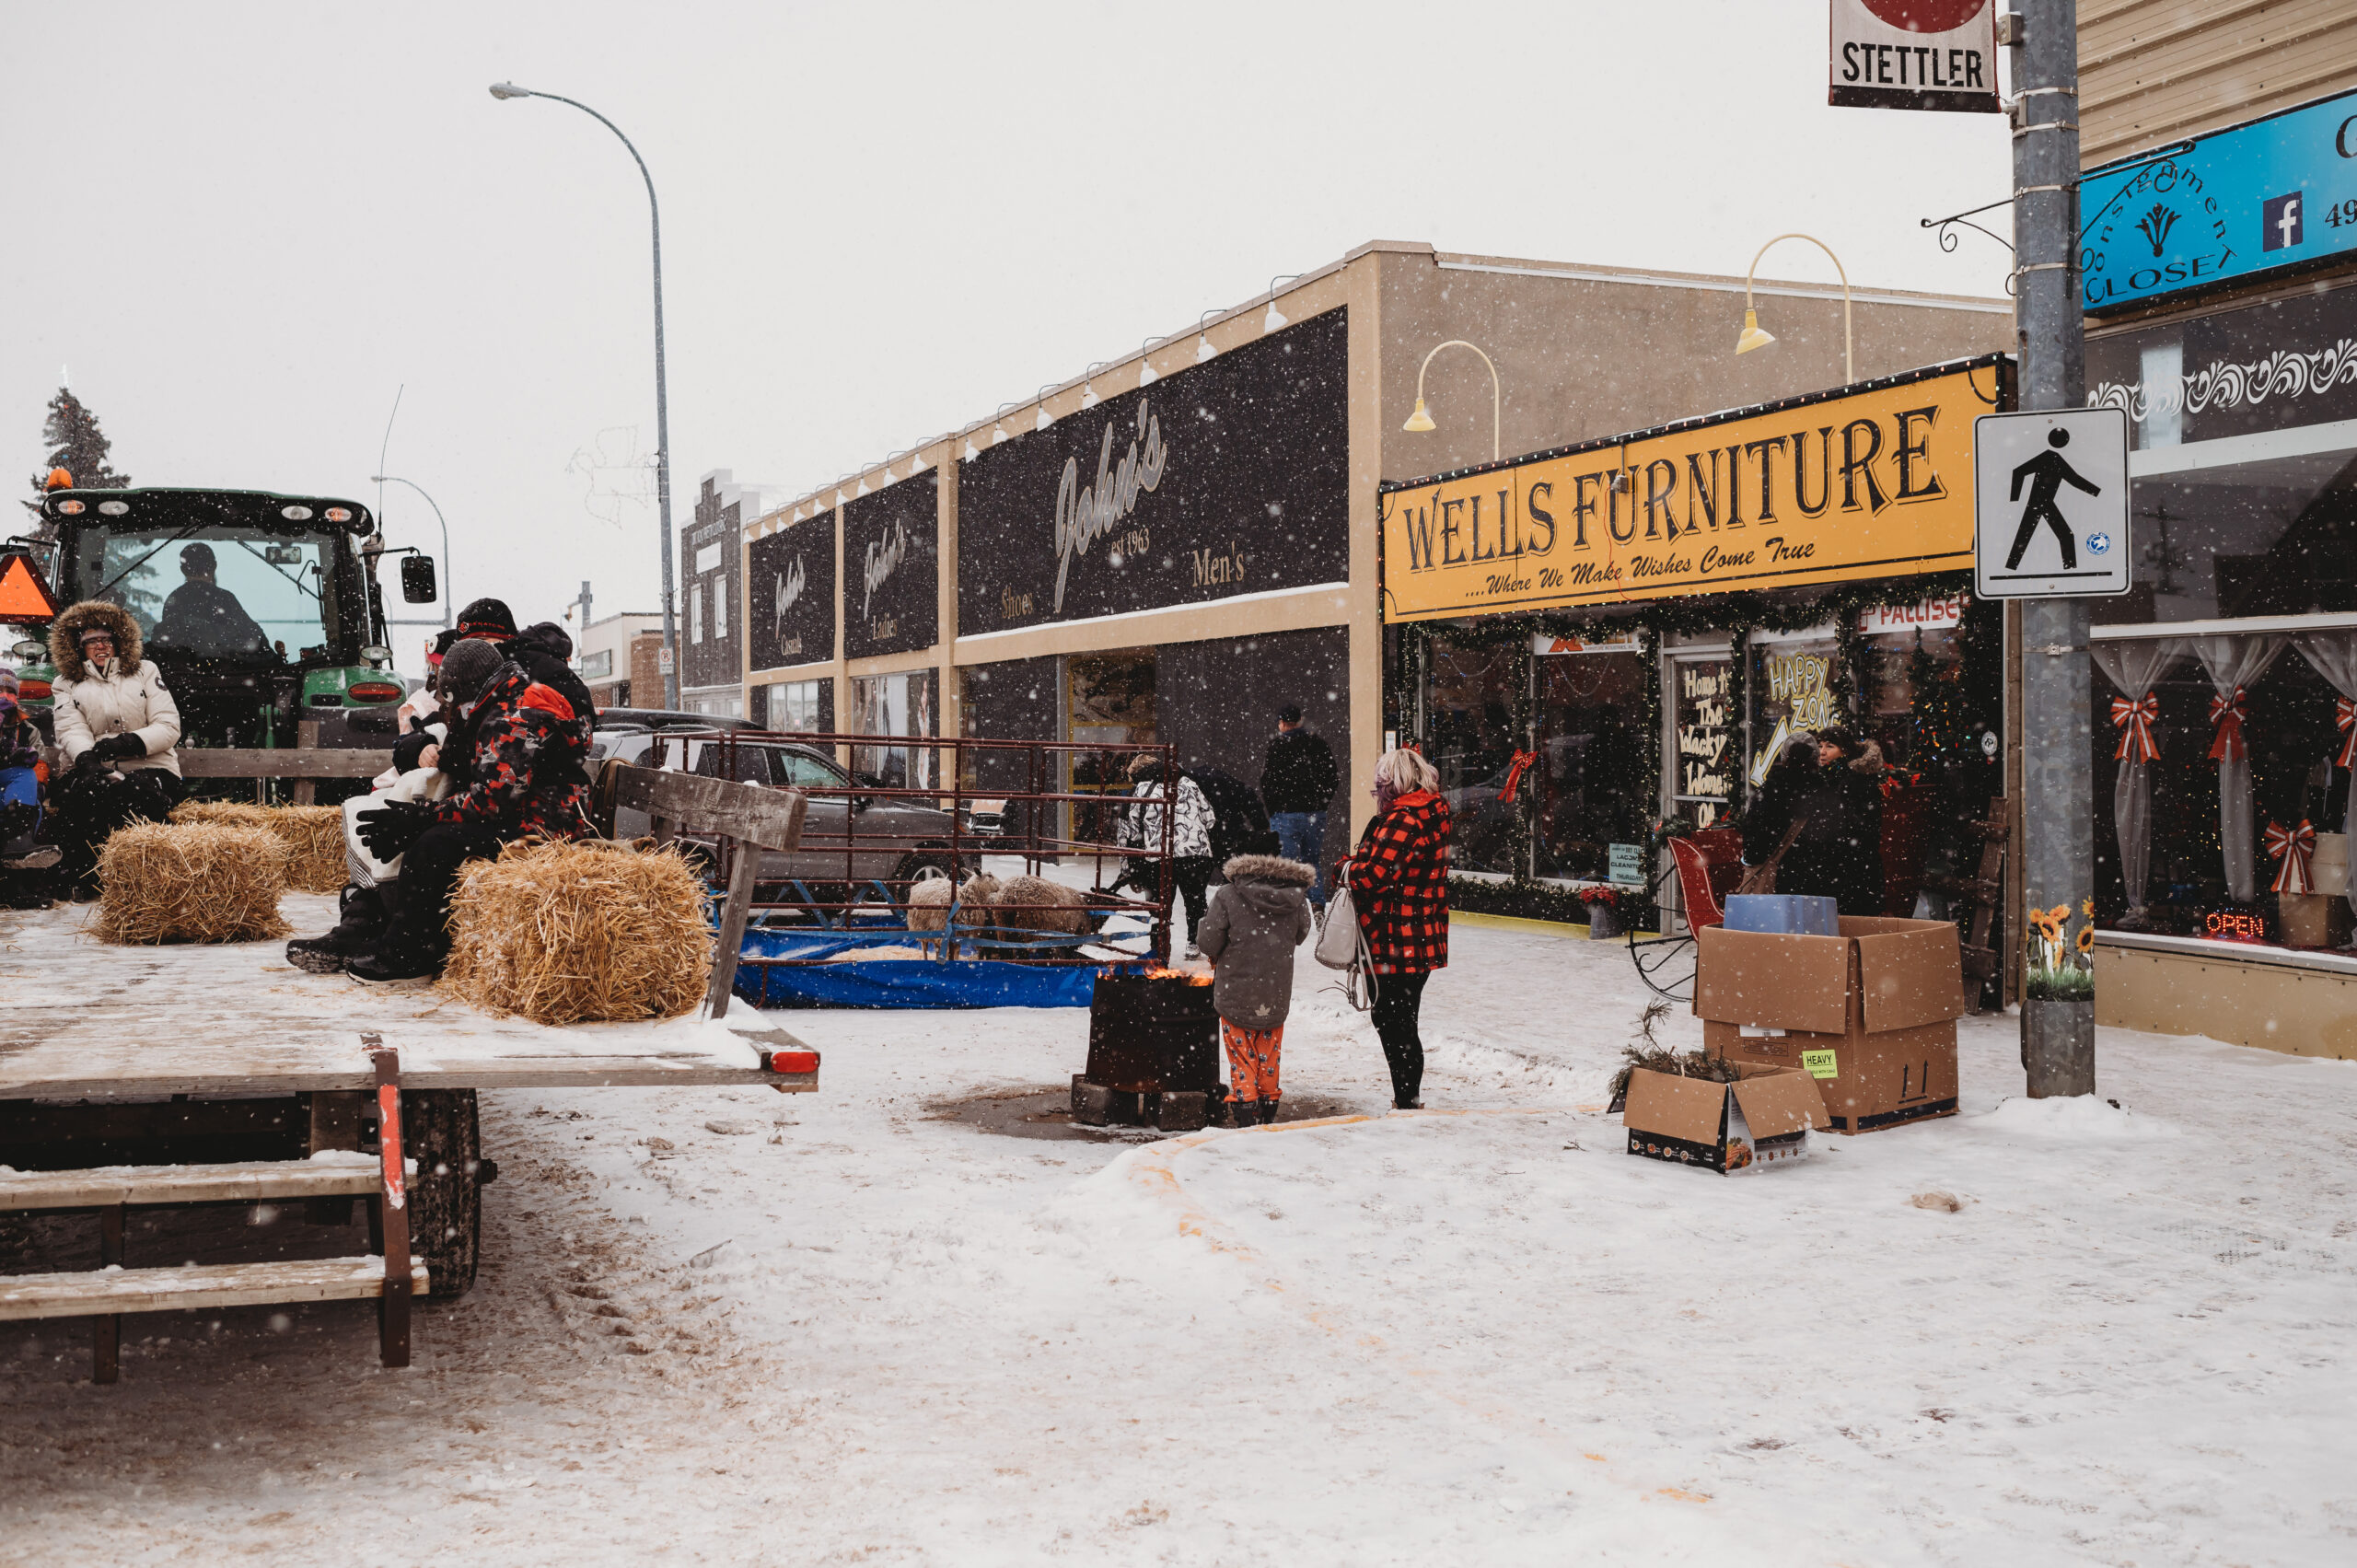 Join the Stettler community for this time-honoured holiday tradition - The Night Before the Night Before on Saturday December 23! A full day of events, shopping and festive fun! 